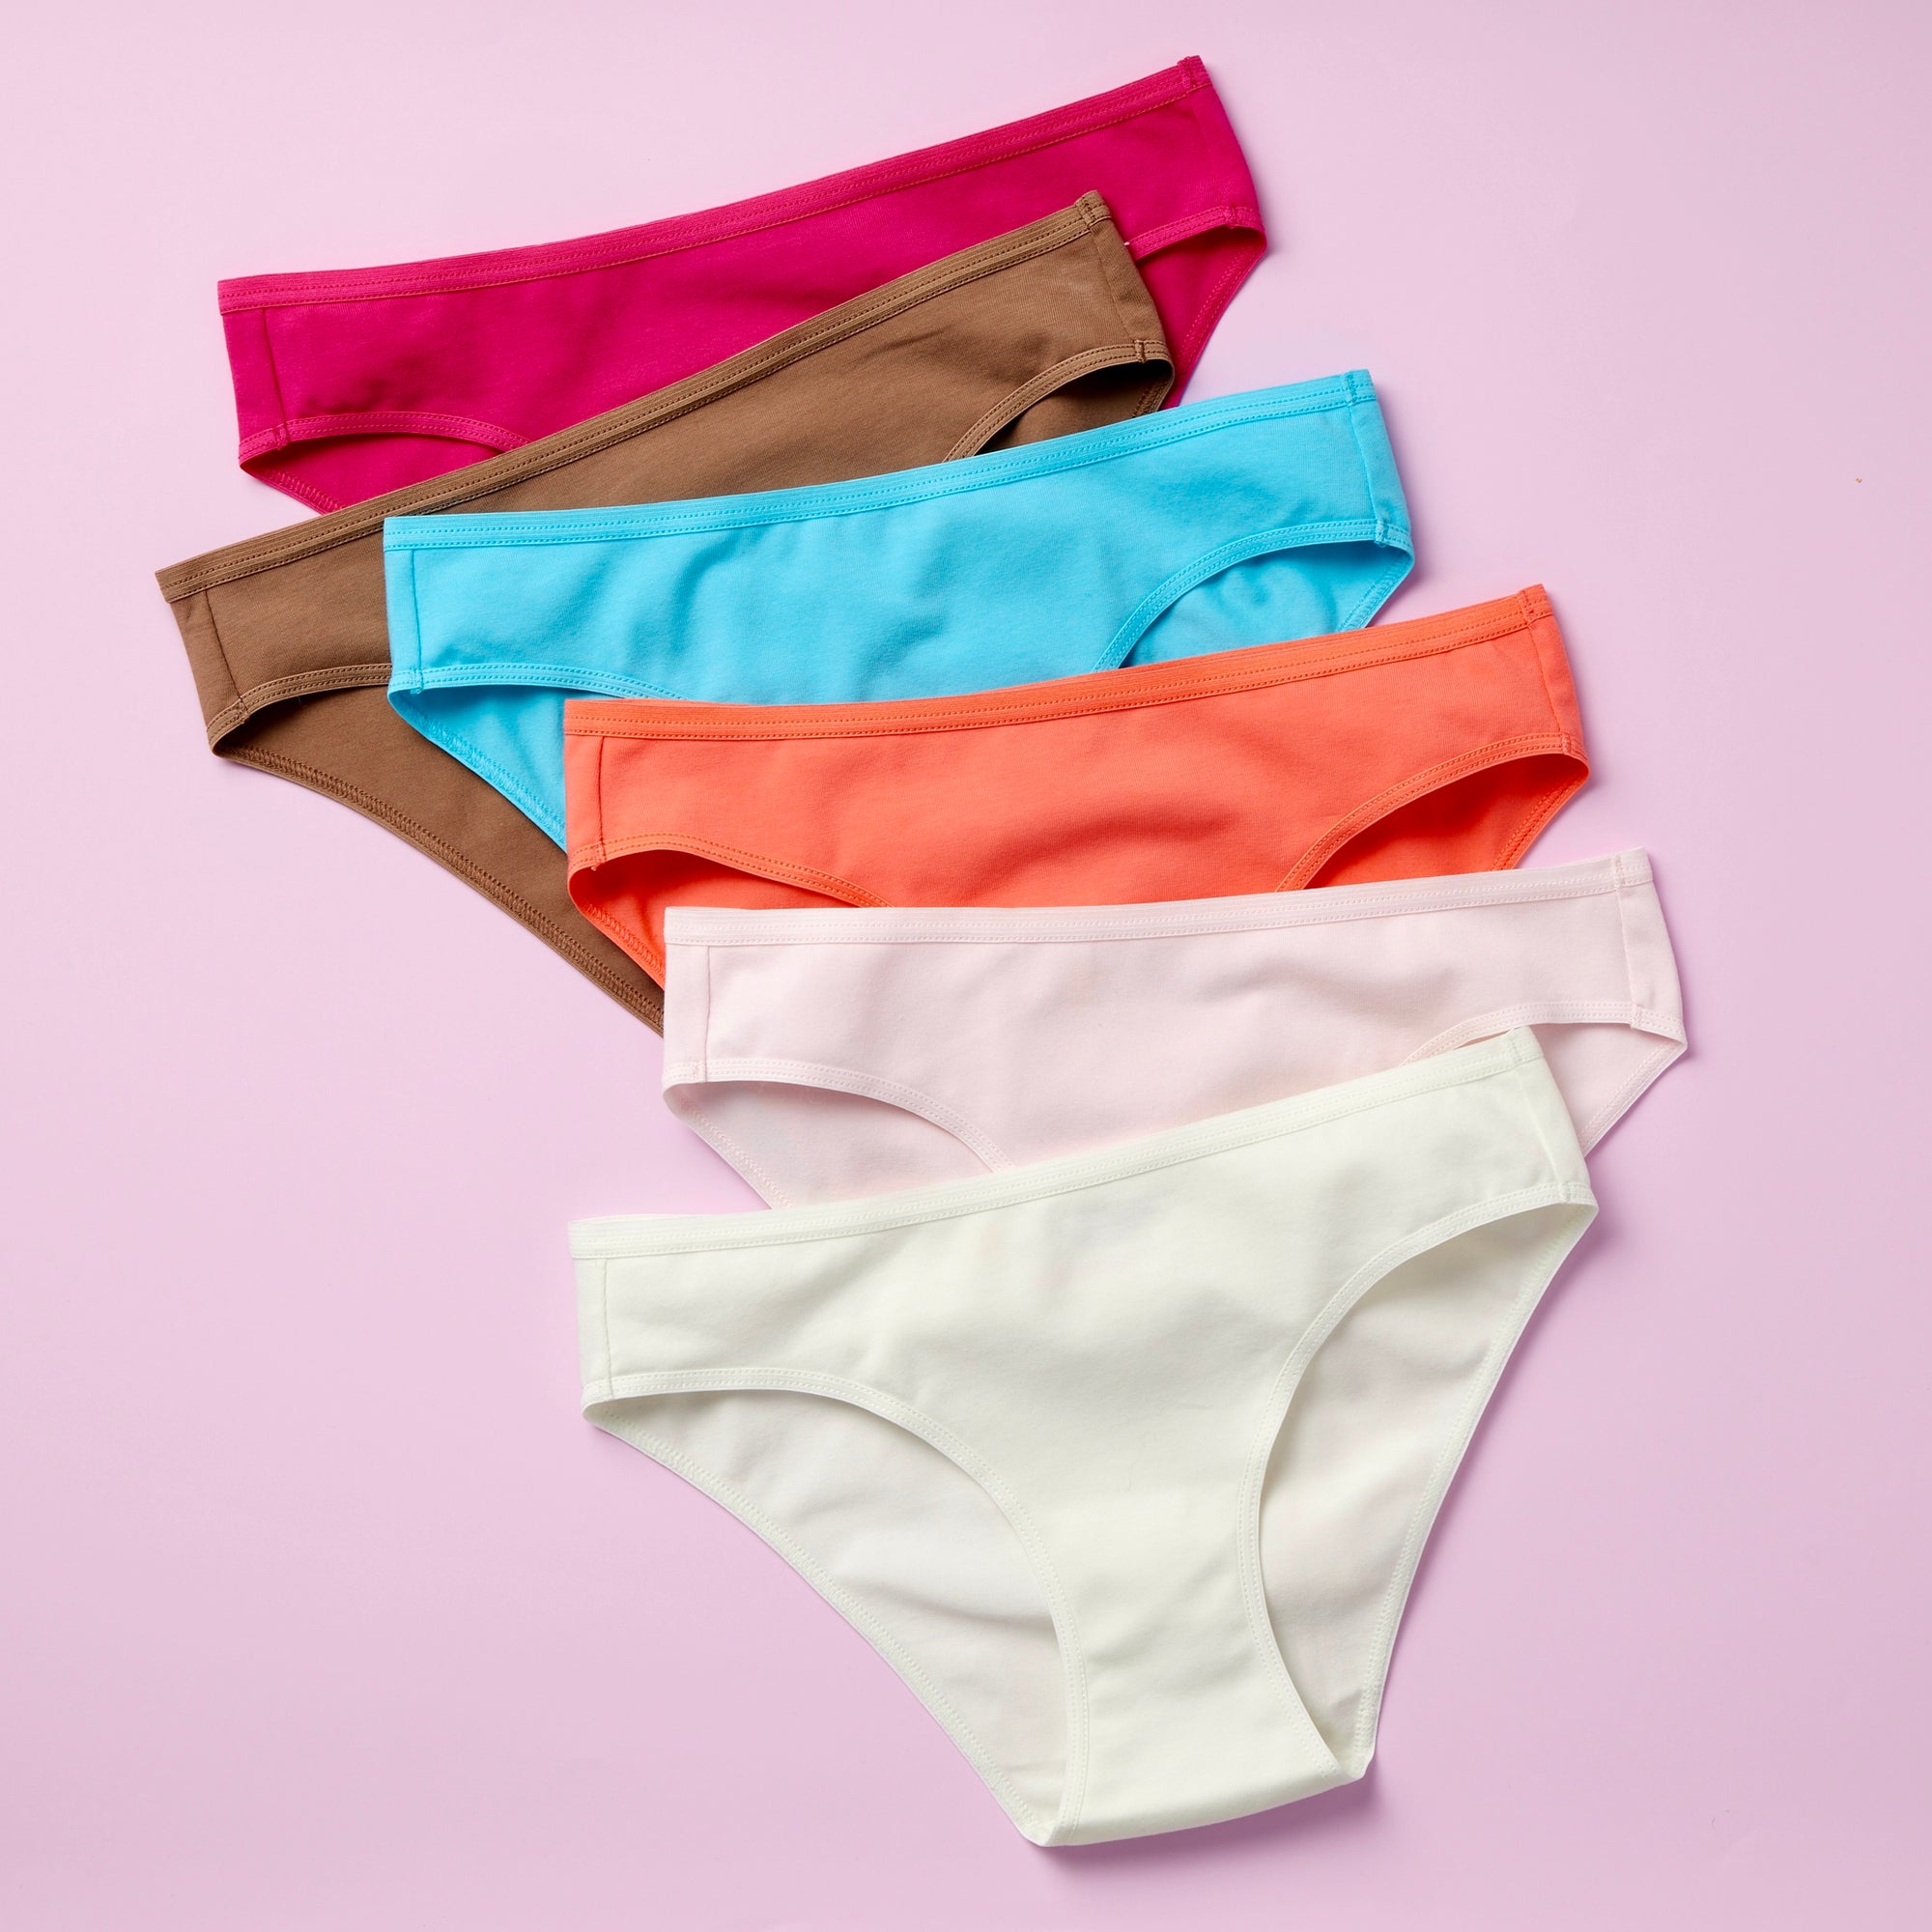 Bodycare 100 Cotton Teenager Panties In Pack Of 3-t-923-assorted, T-923-3pcs-assorted